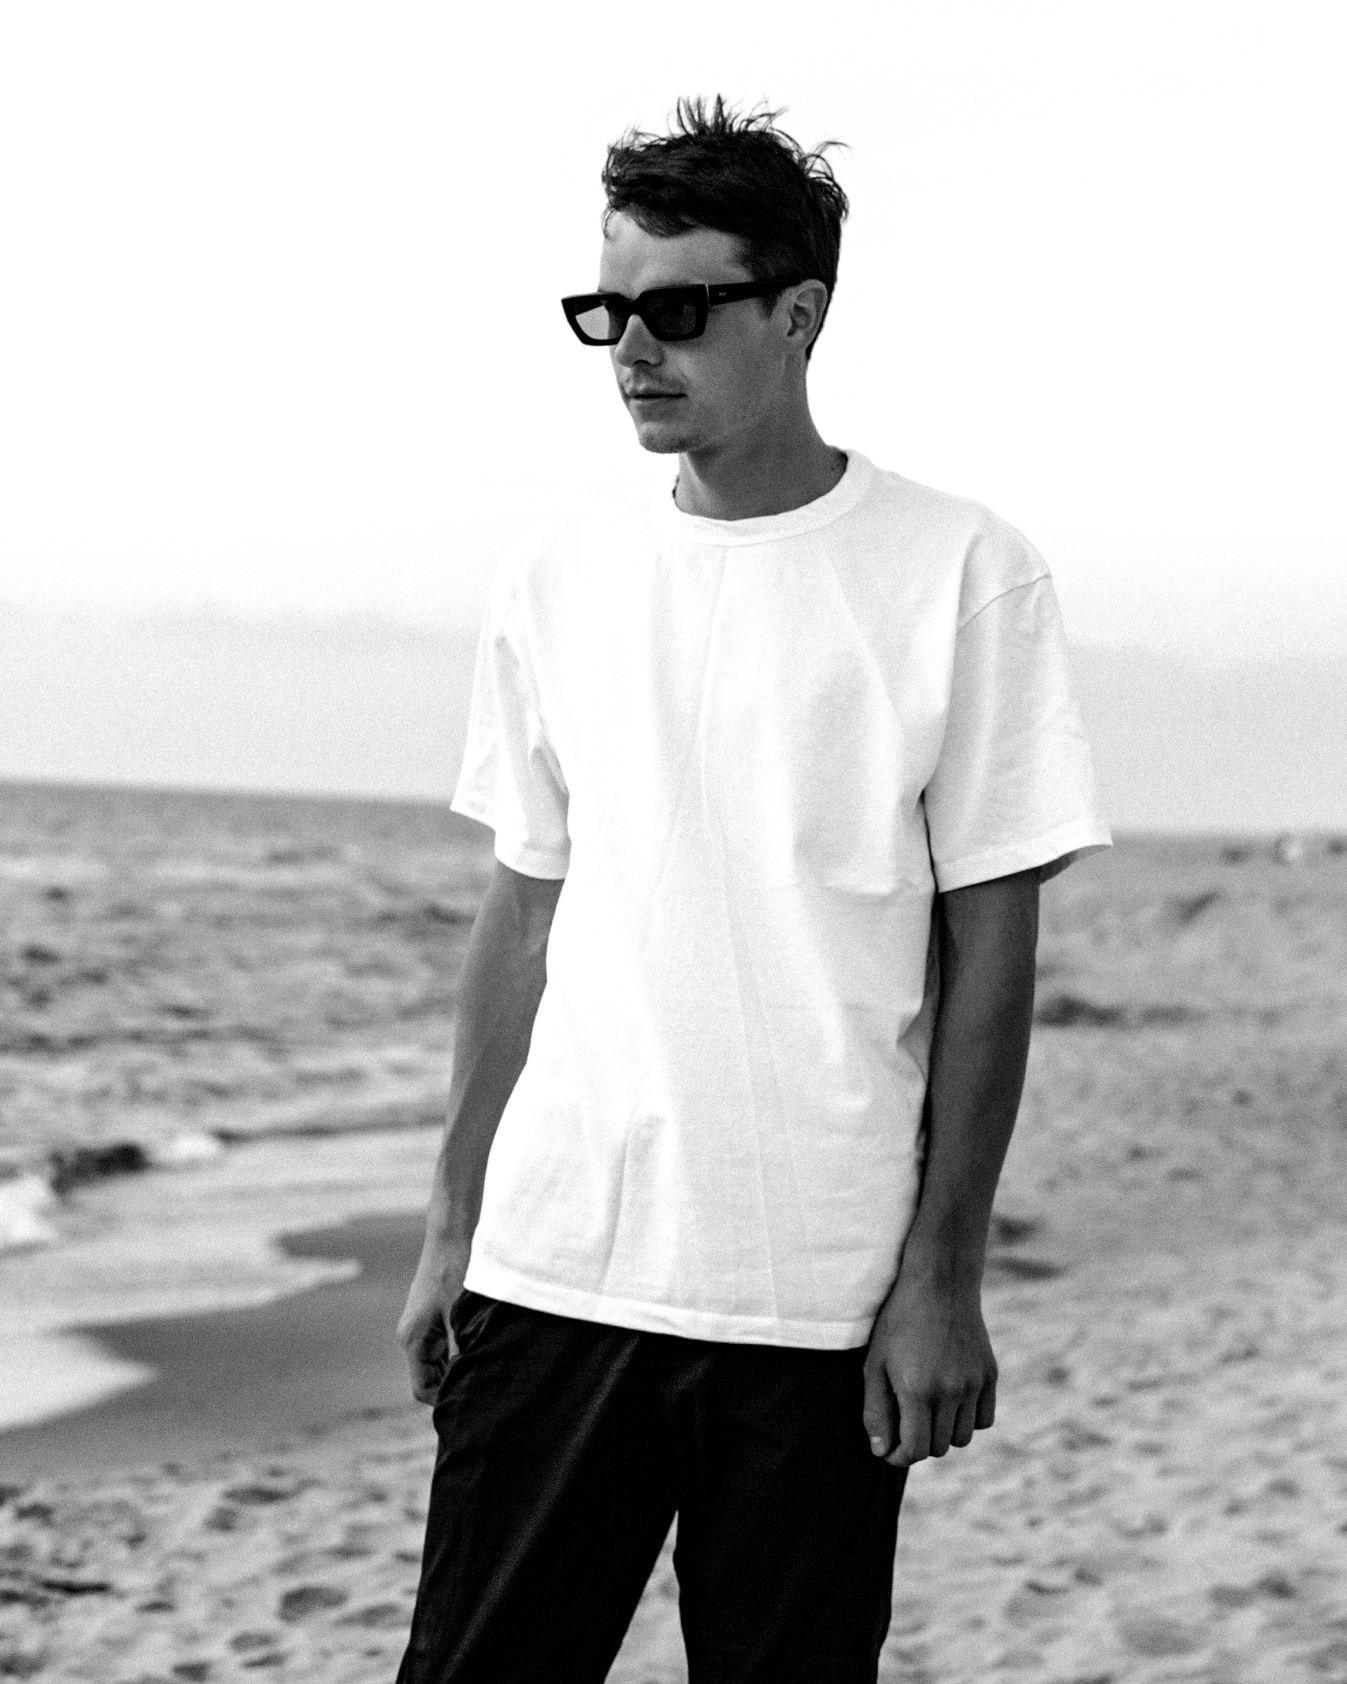 A portrait picture of Paulius Kairevicius standing next to the seaside wearing sunglasses, white t-shirt and black pants